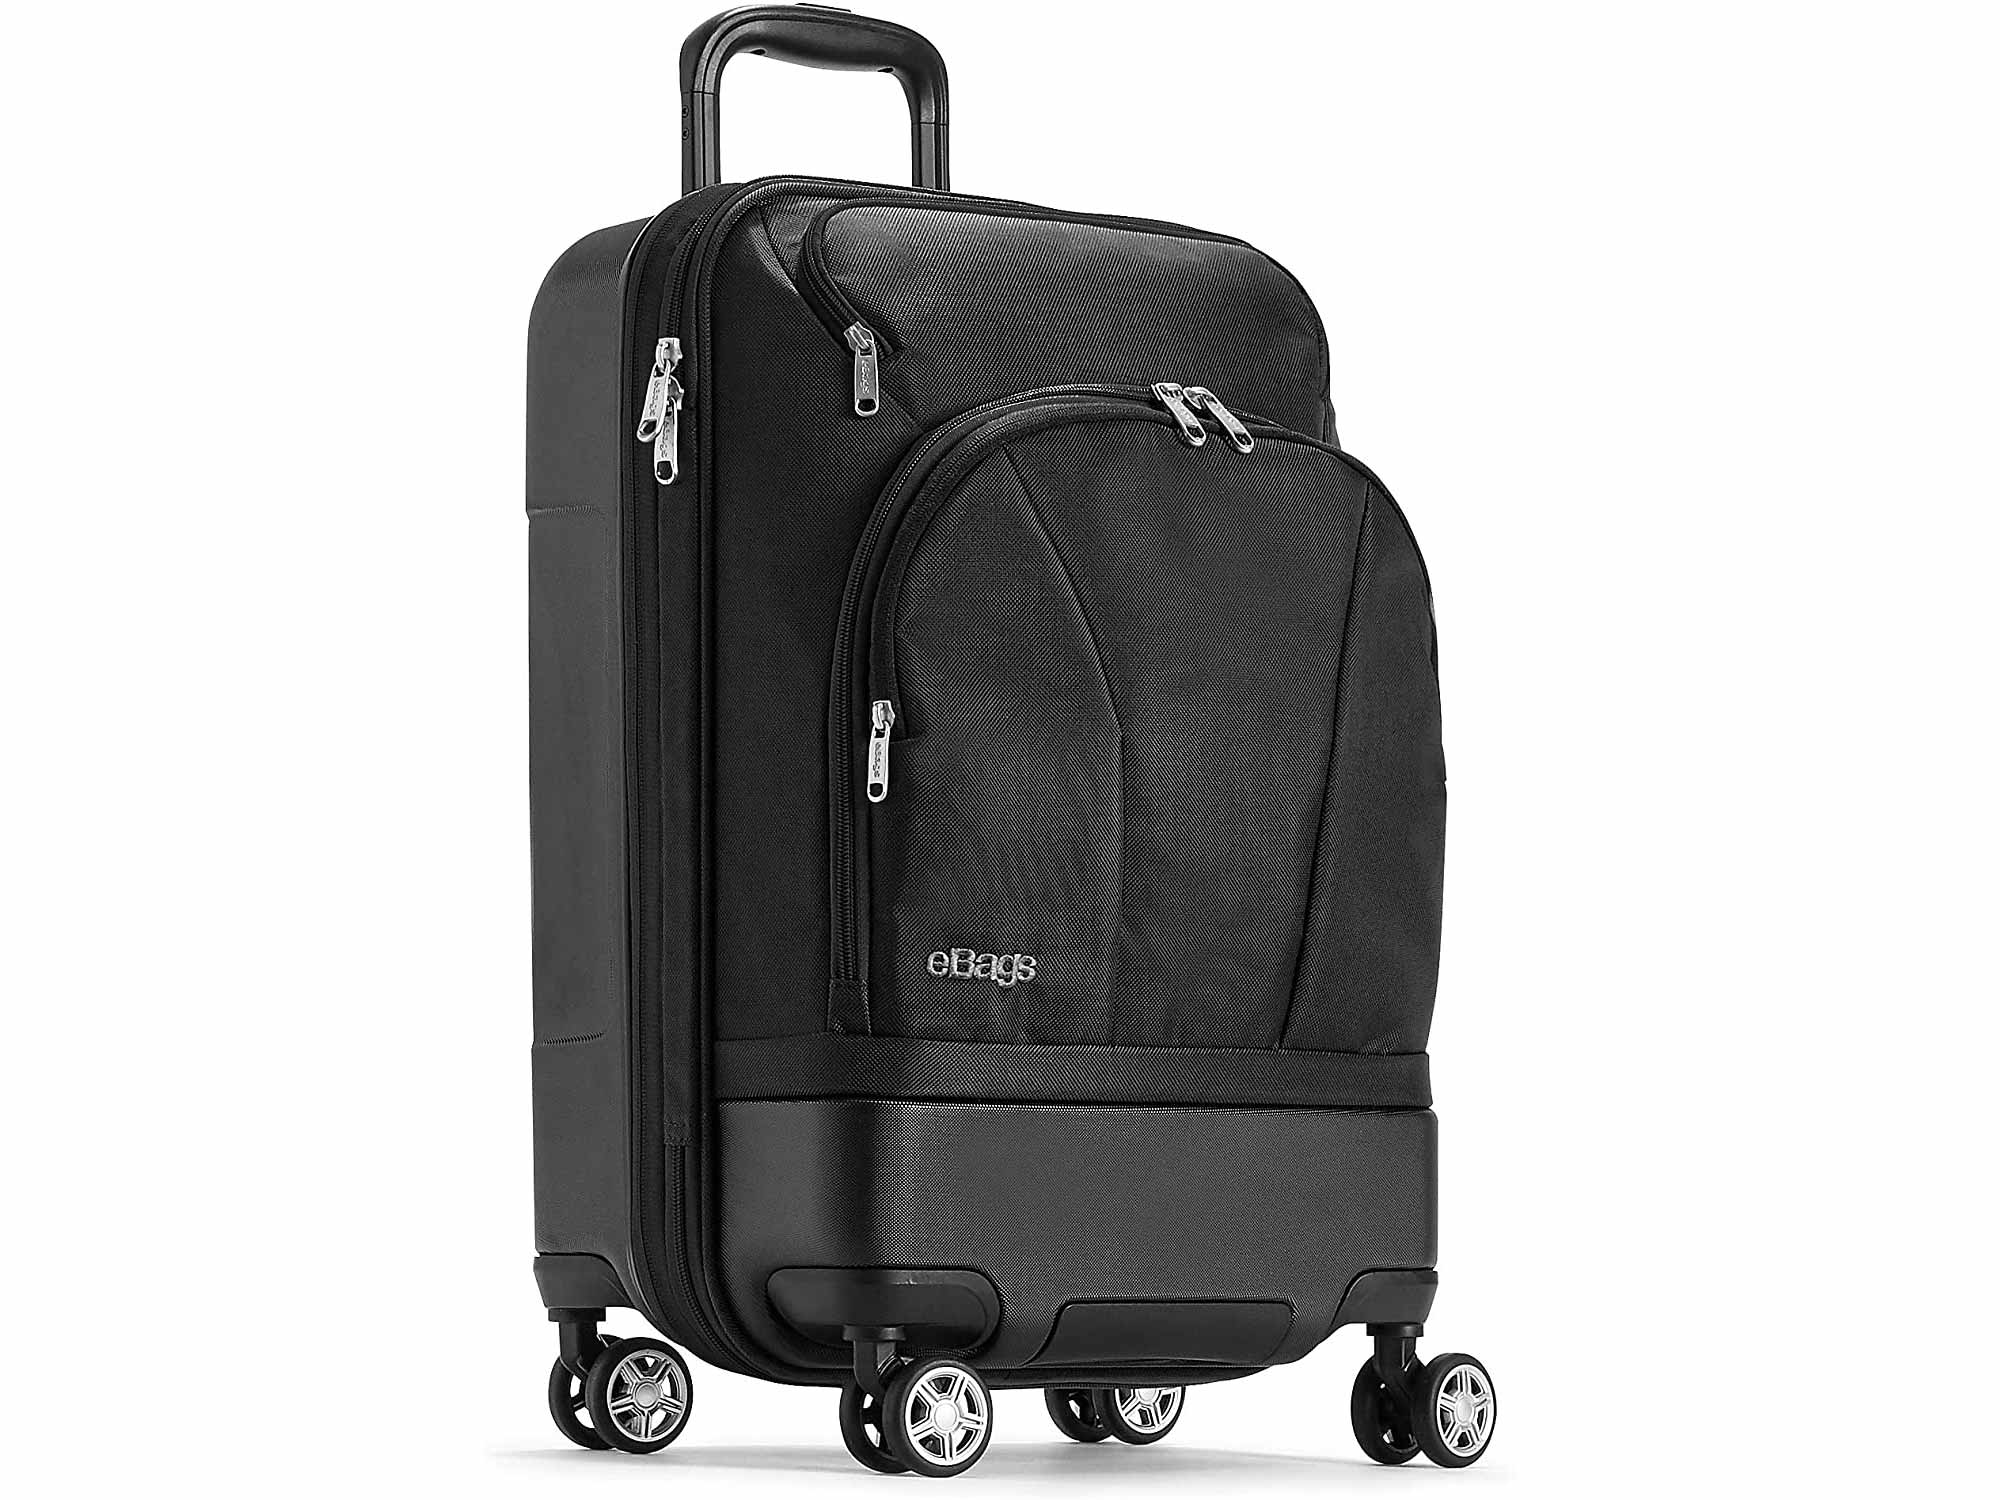 eBags Mother Lode 22 Inches Carry-On Spinner